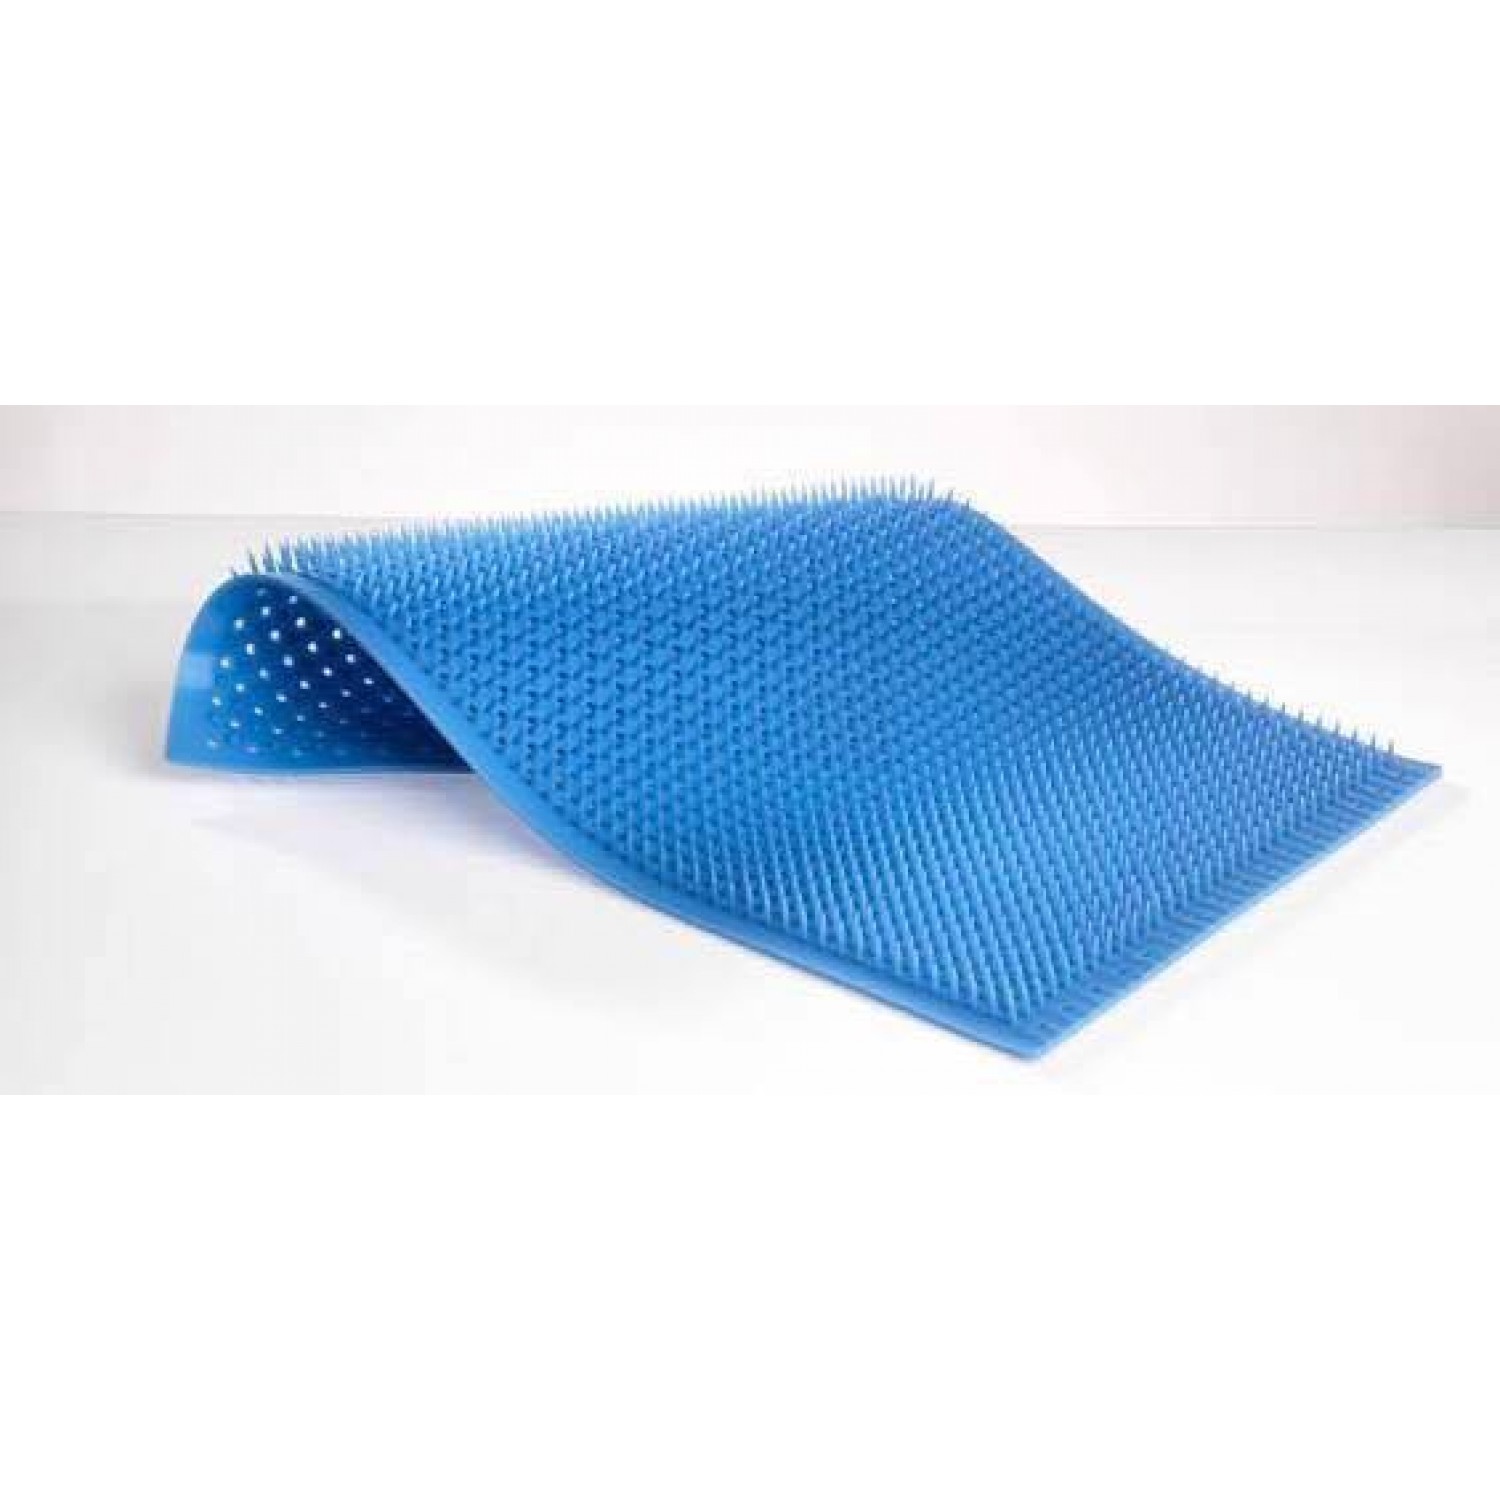 Blue Silicone Surgical Sterilization Silicon Mat, For Hospital, Size